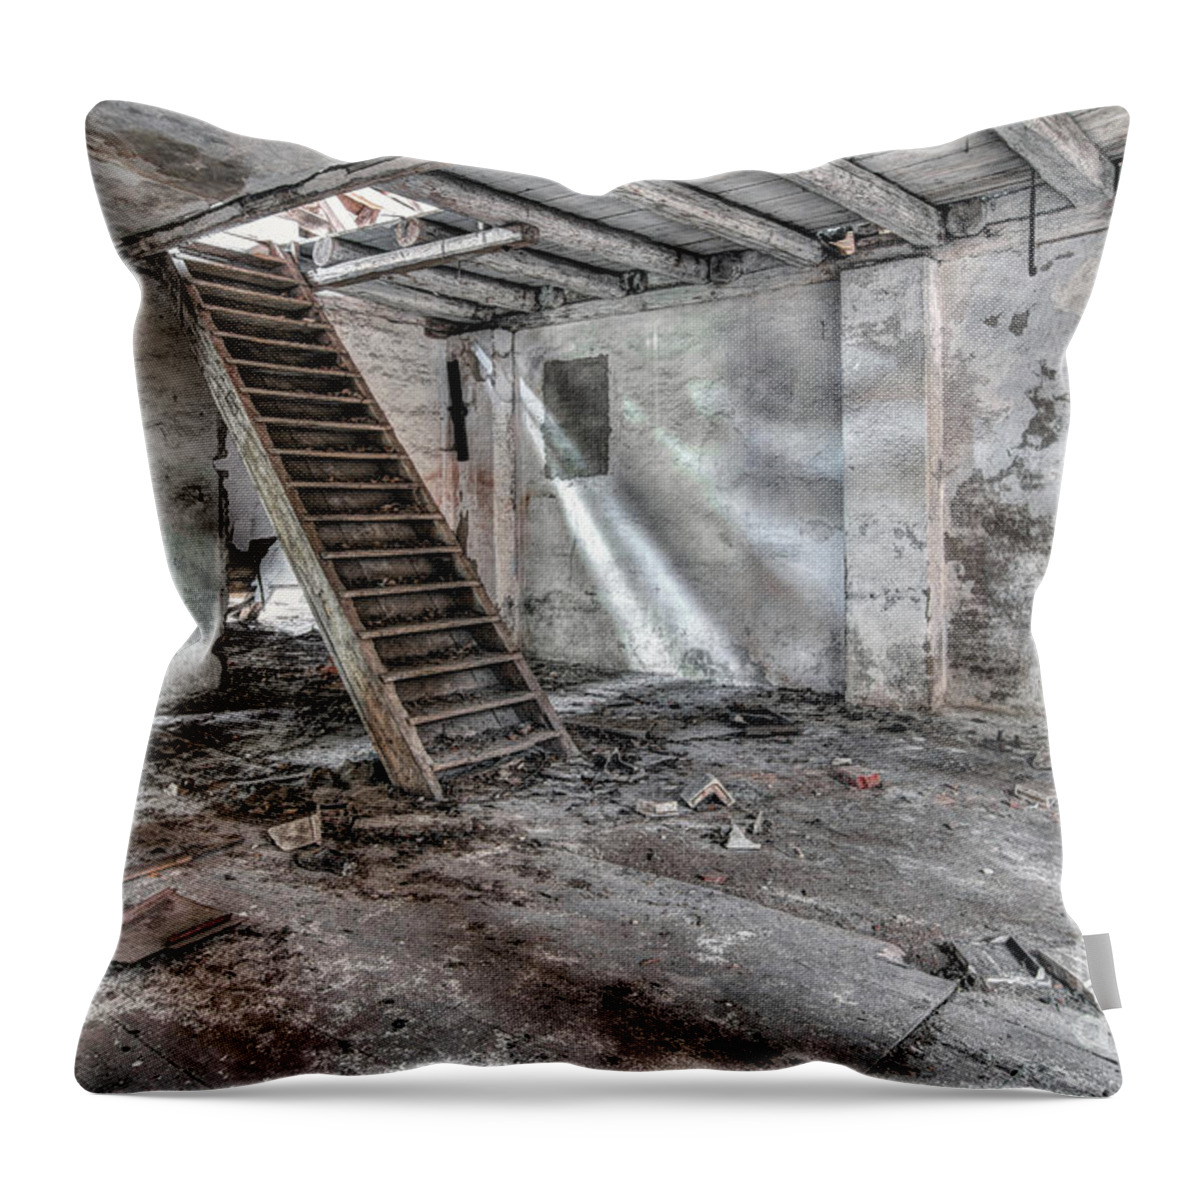 Urbex Throw Pillow featuring the photograph Stair in old abandoned building by Michal Boubin